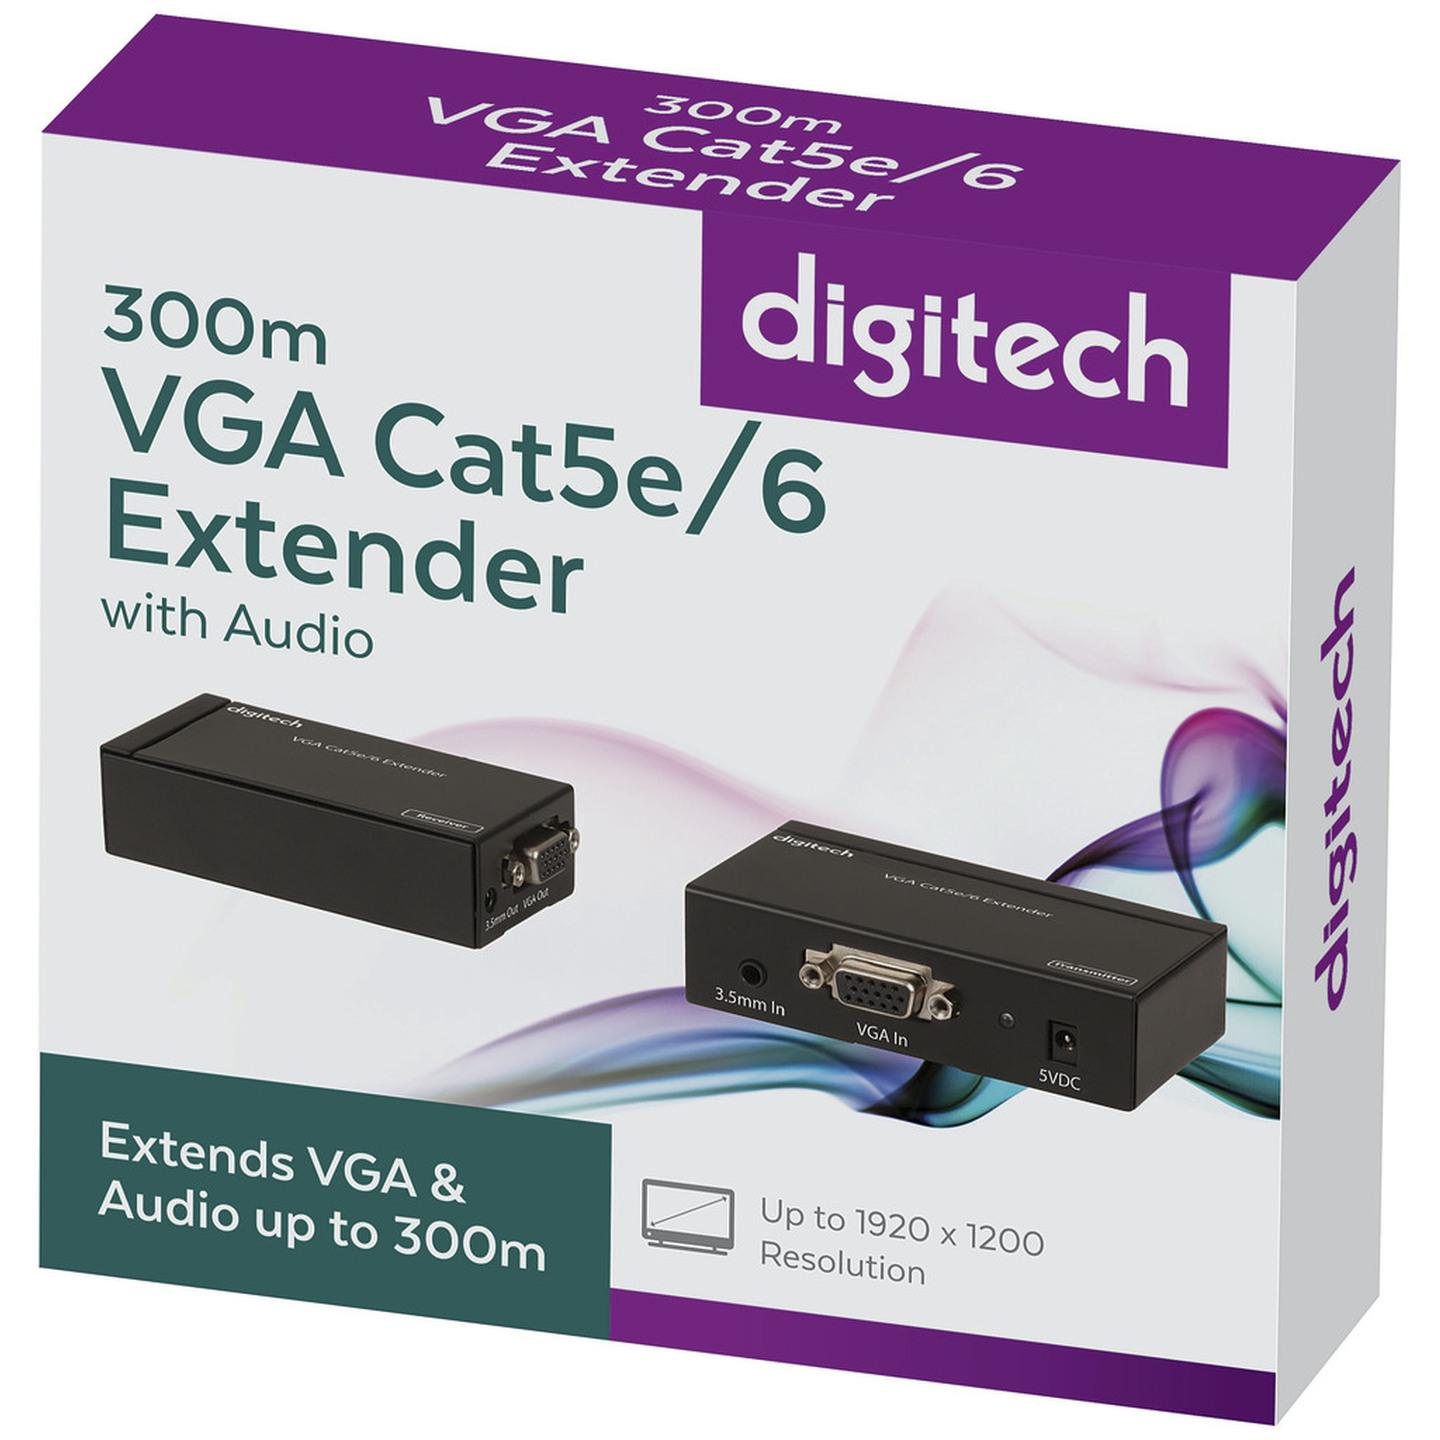 300m VGA Cat5e/6 Extender with Audio